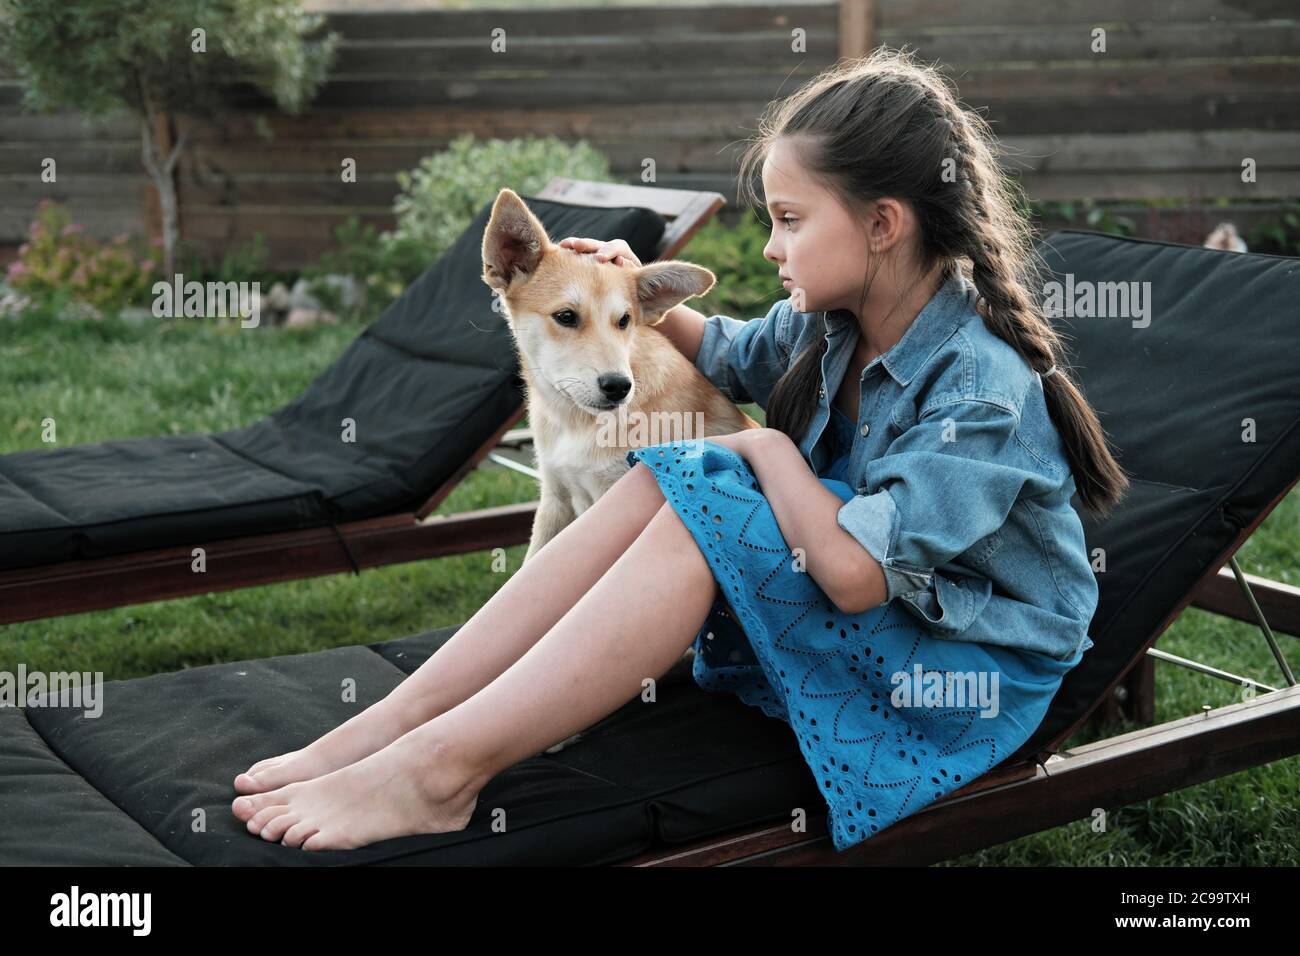 Little girl resting on lounger with her dog outdoors in the country Stock Photo